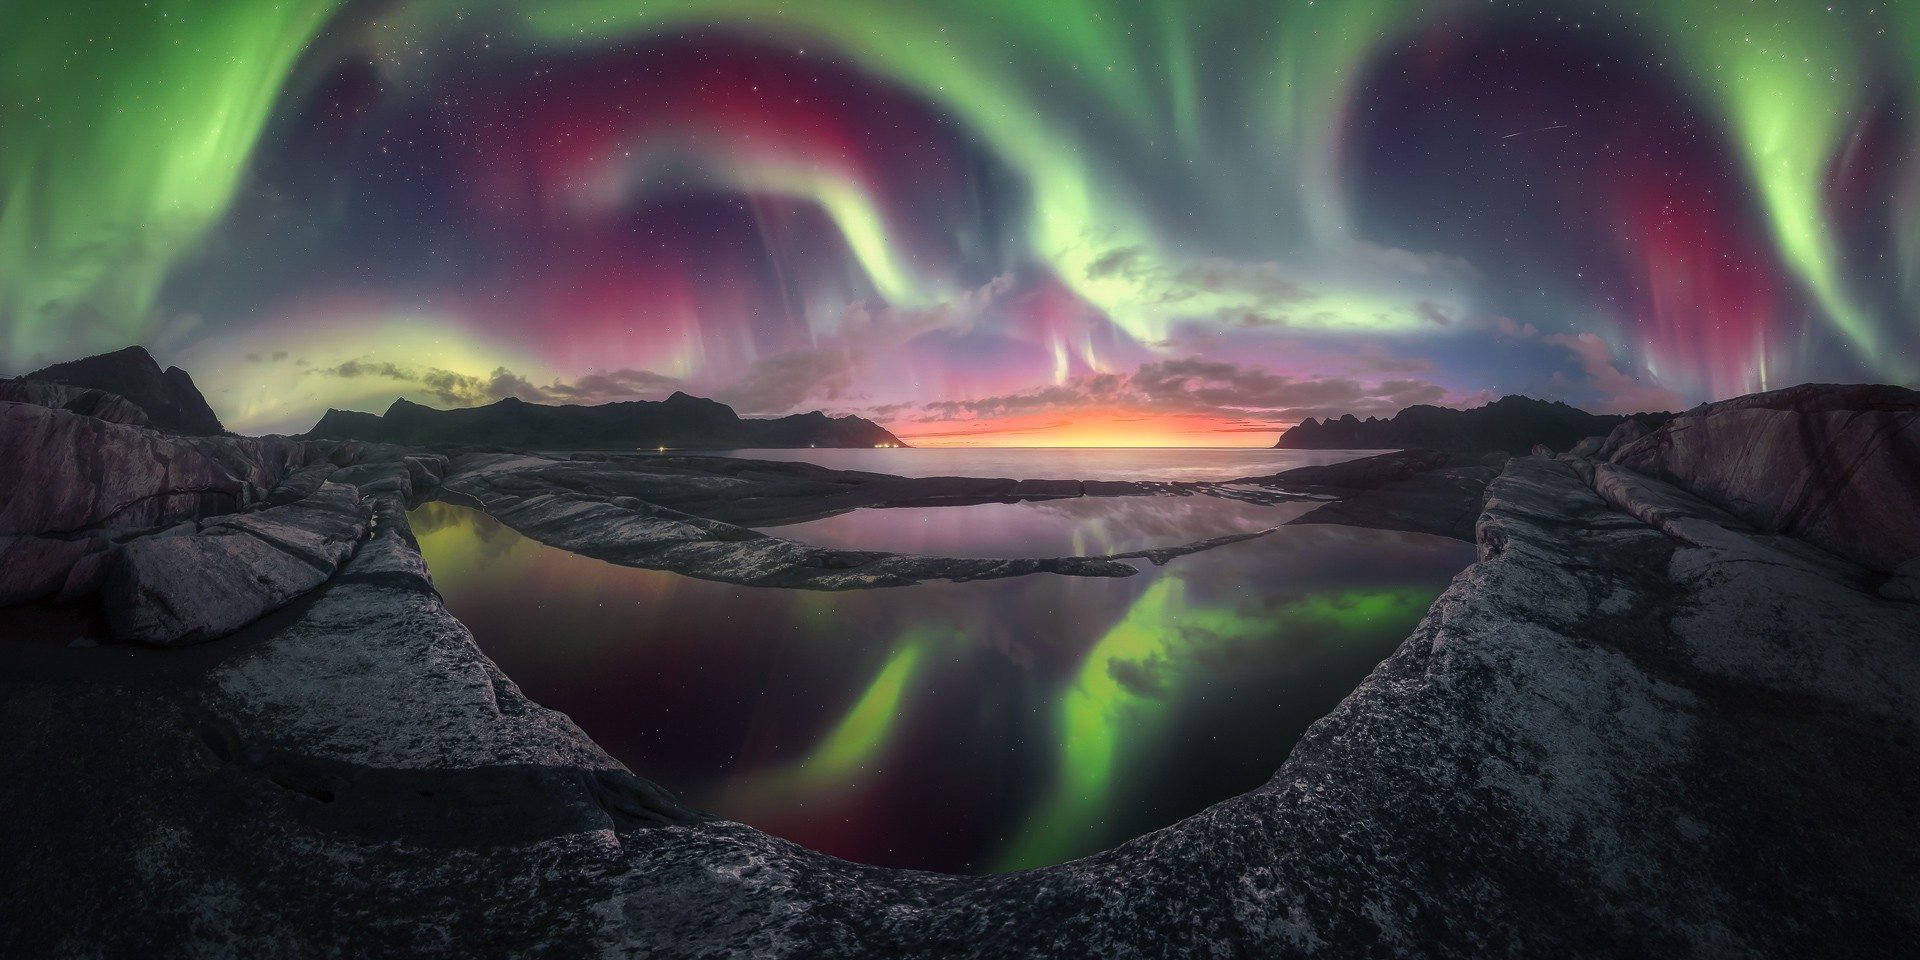 Panorama of the northern lights covering the sky with a reflection in the foreground